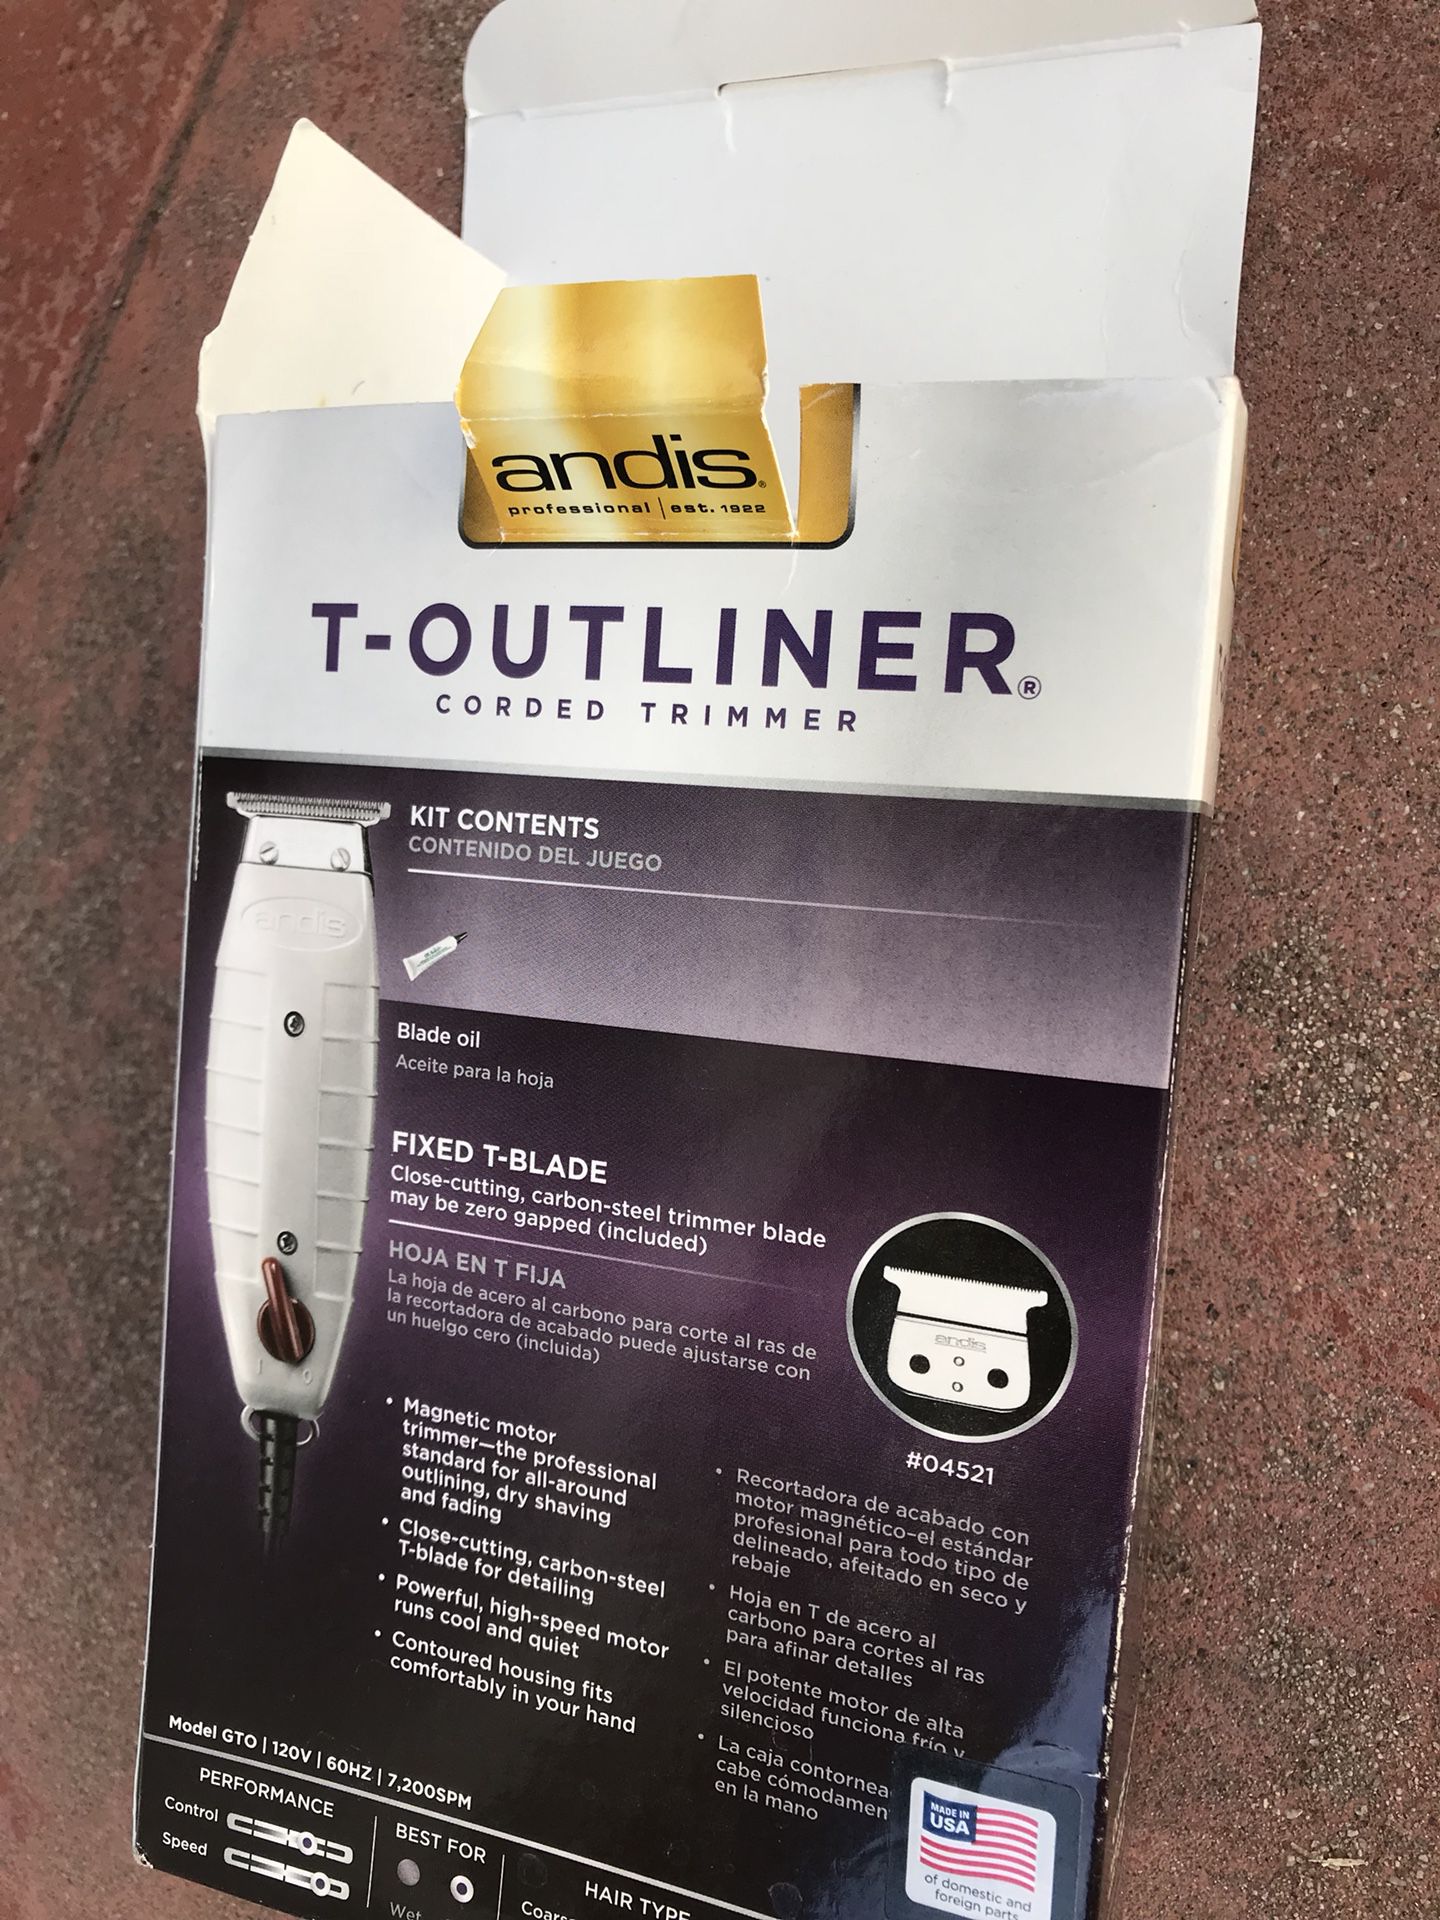 Andis trimmer almost free $20